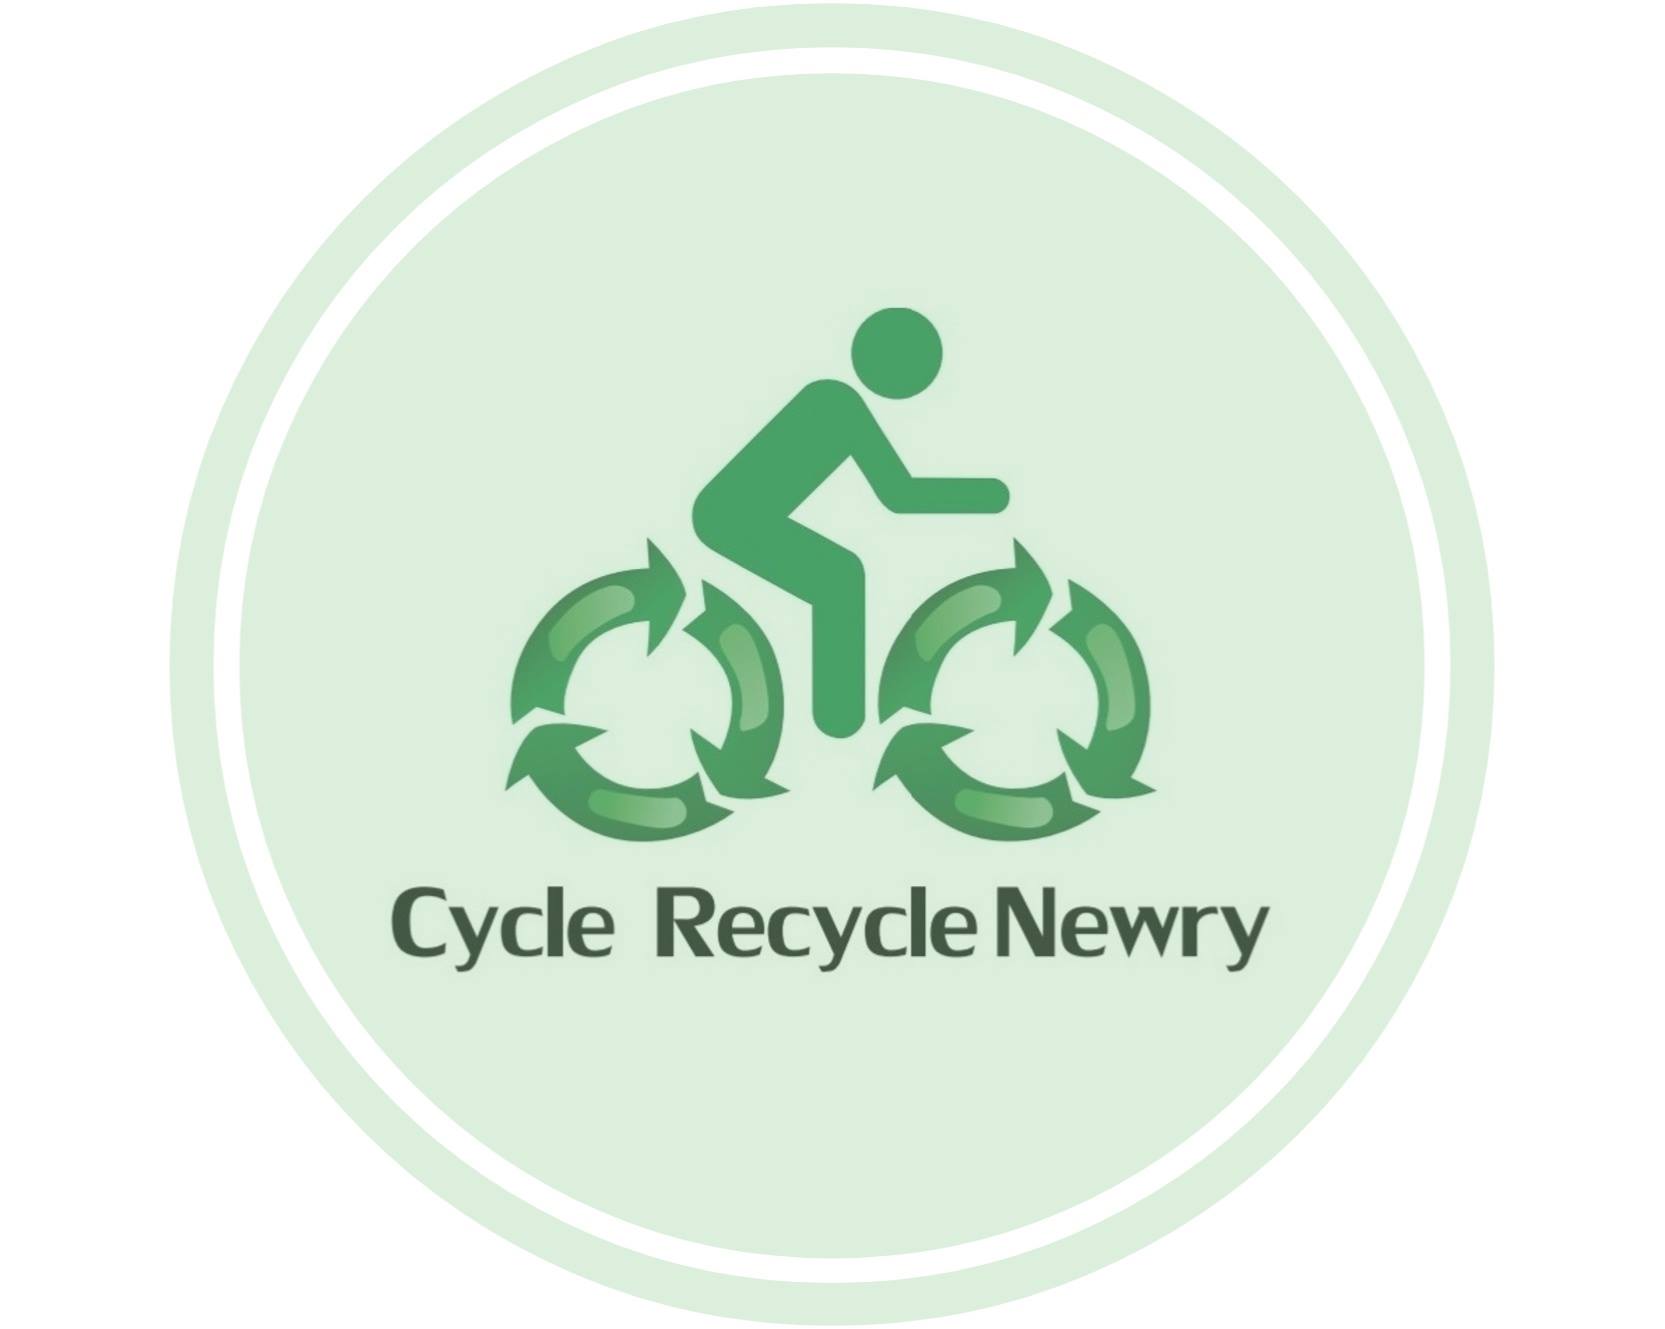 Cycle Recycle Newry